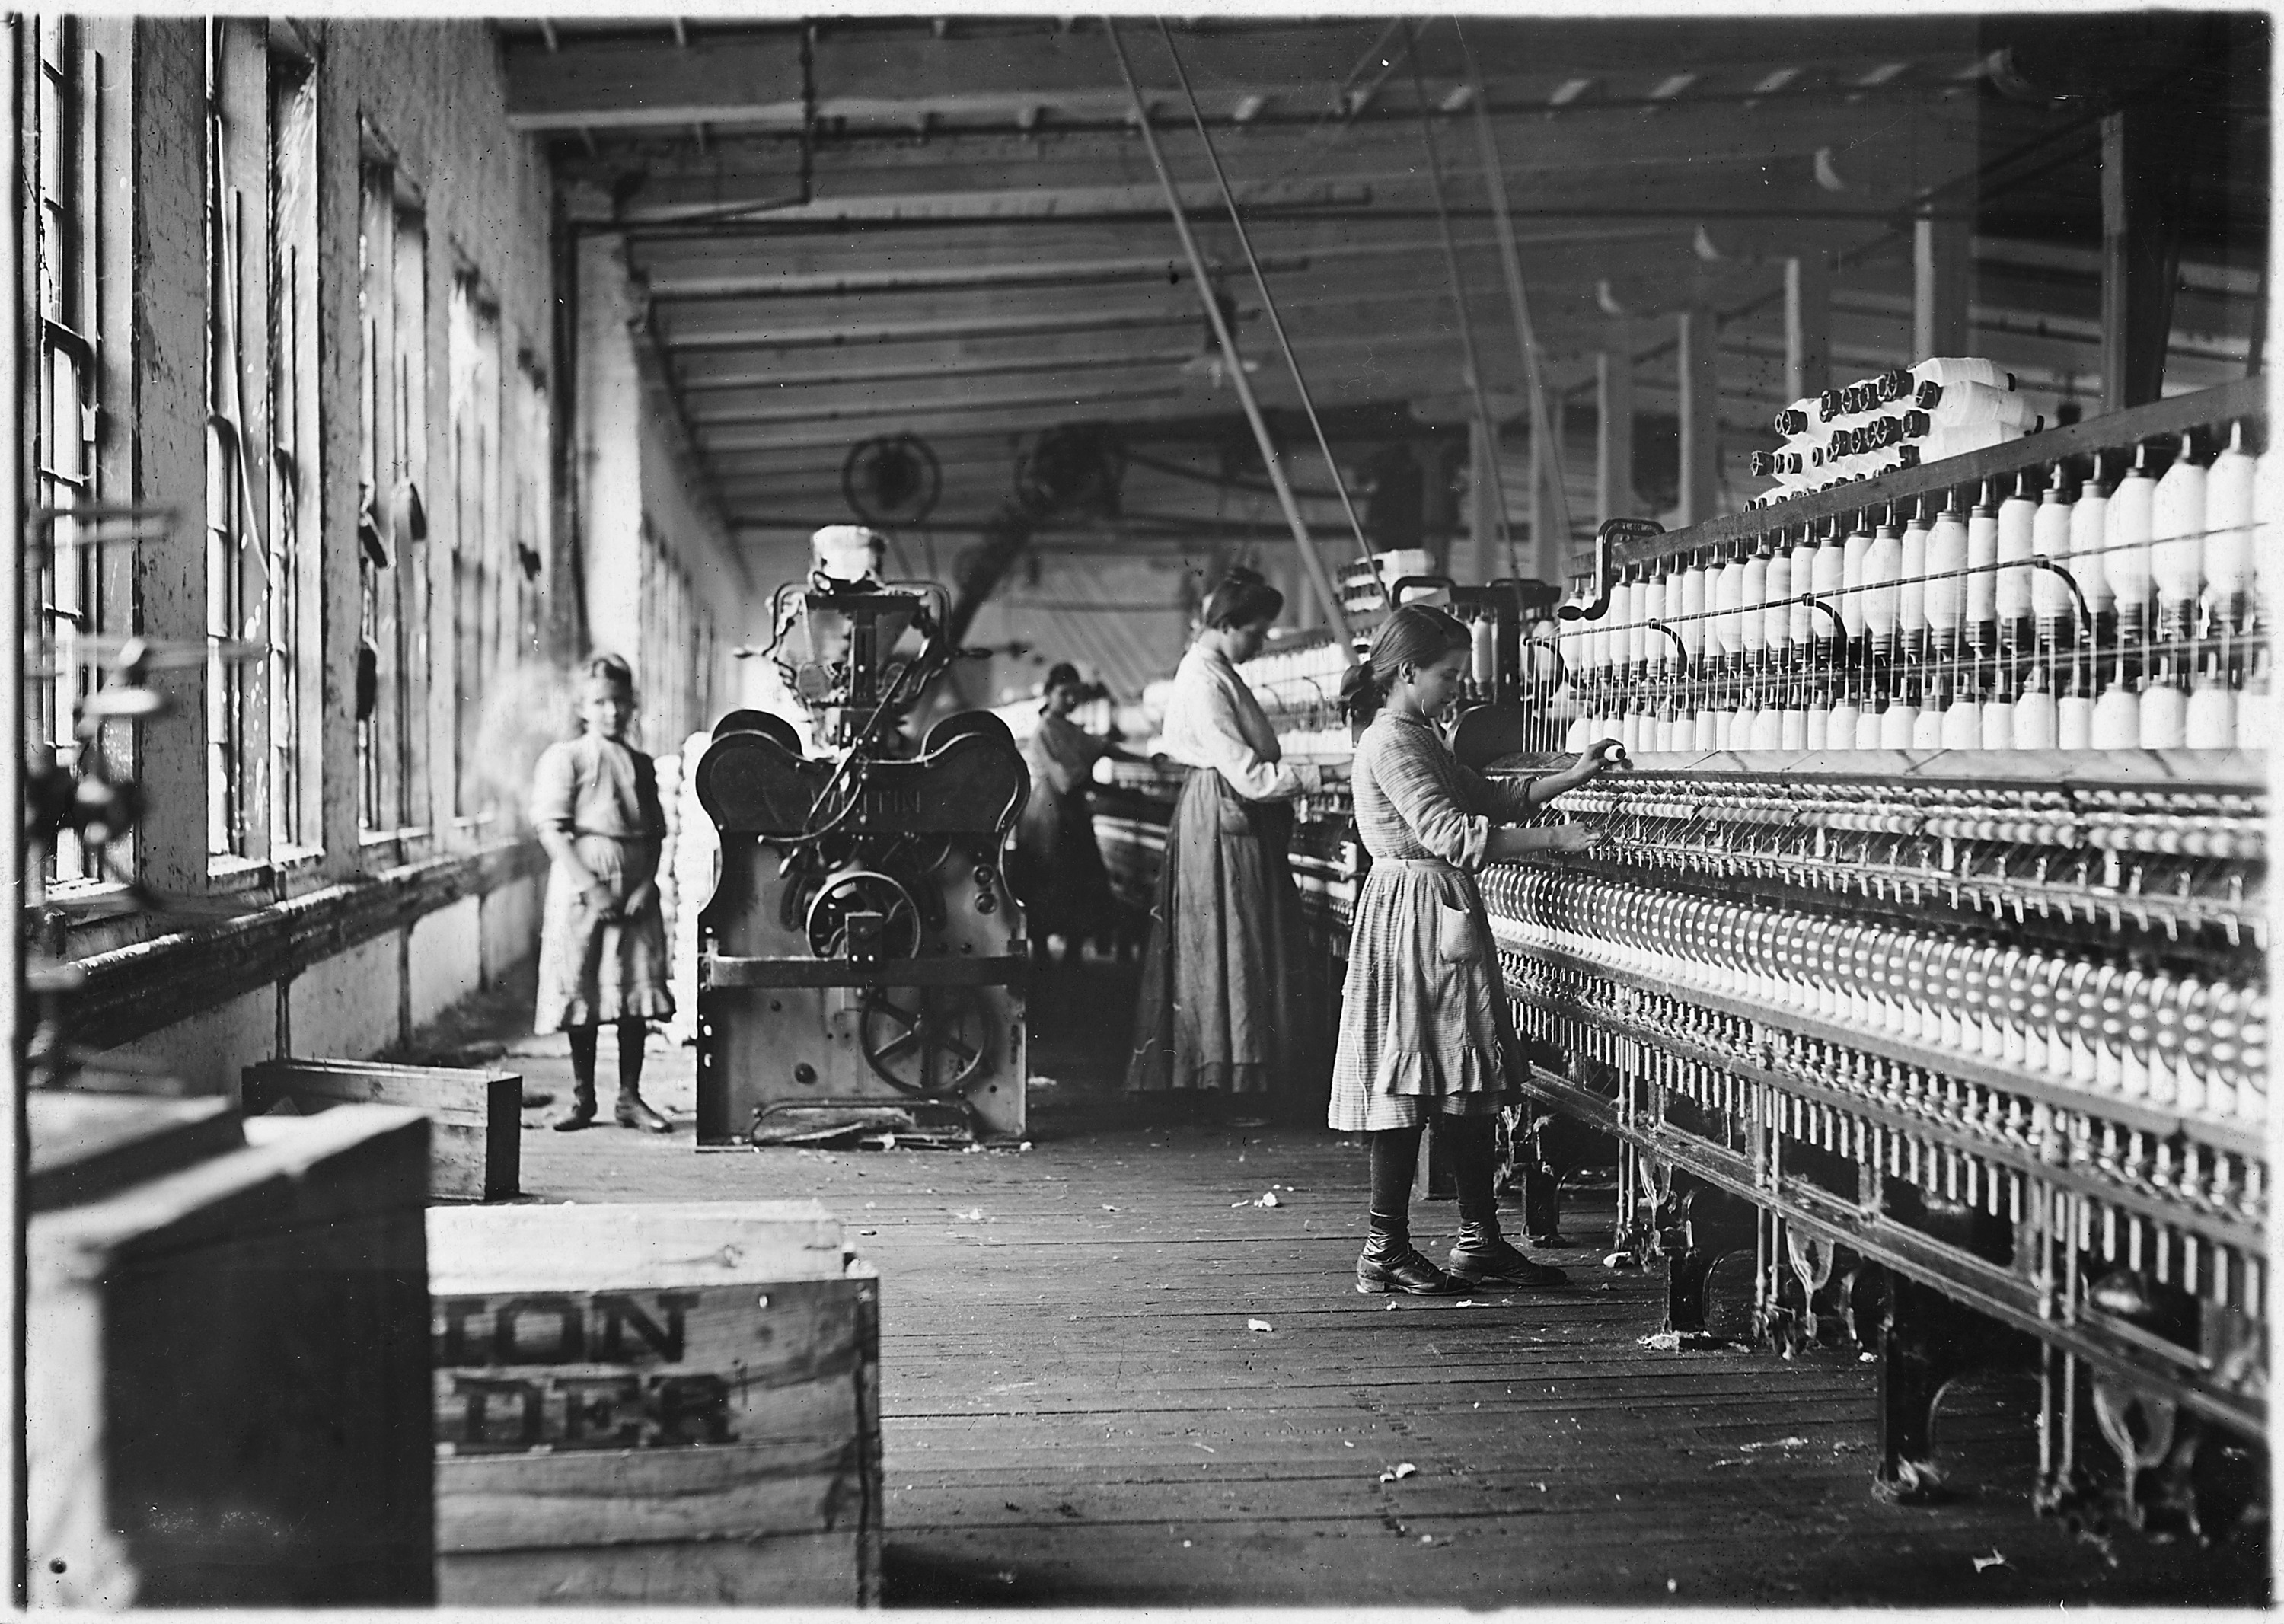 Two of the young spinners in Catawba Cotton Mills. Newton, N.C. - NARA - 523142